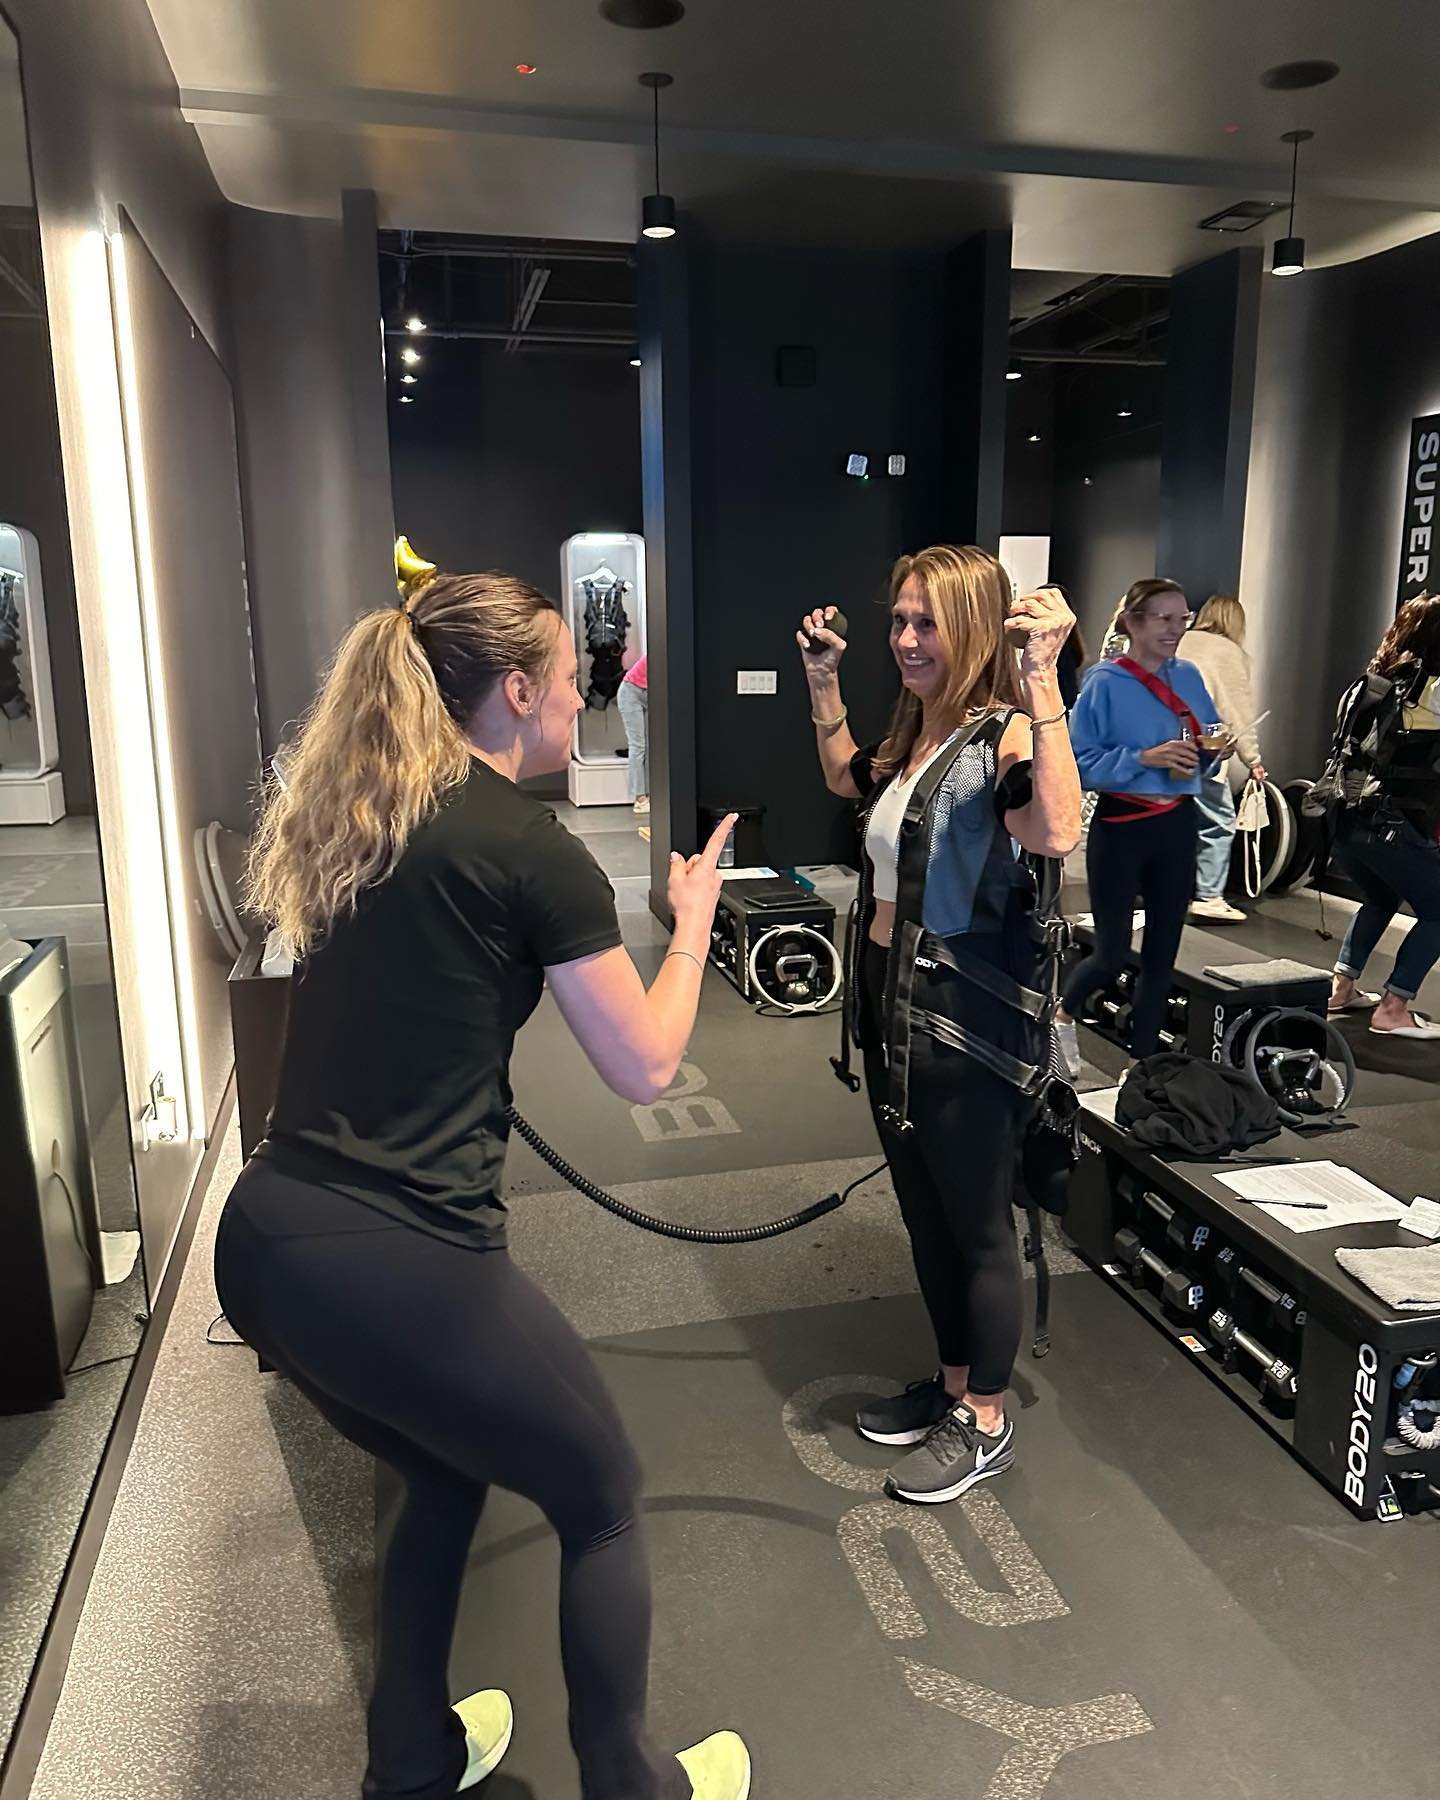 Thank you to Rebecca Haass and @body20hinsdale for hosting our April board and general meetings. A few of us got a chance to check out their EMS technology which is on the cutting edge of fitness! 💪💪

@rcamus23